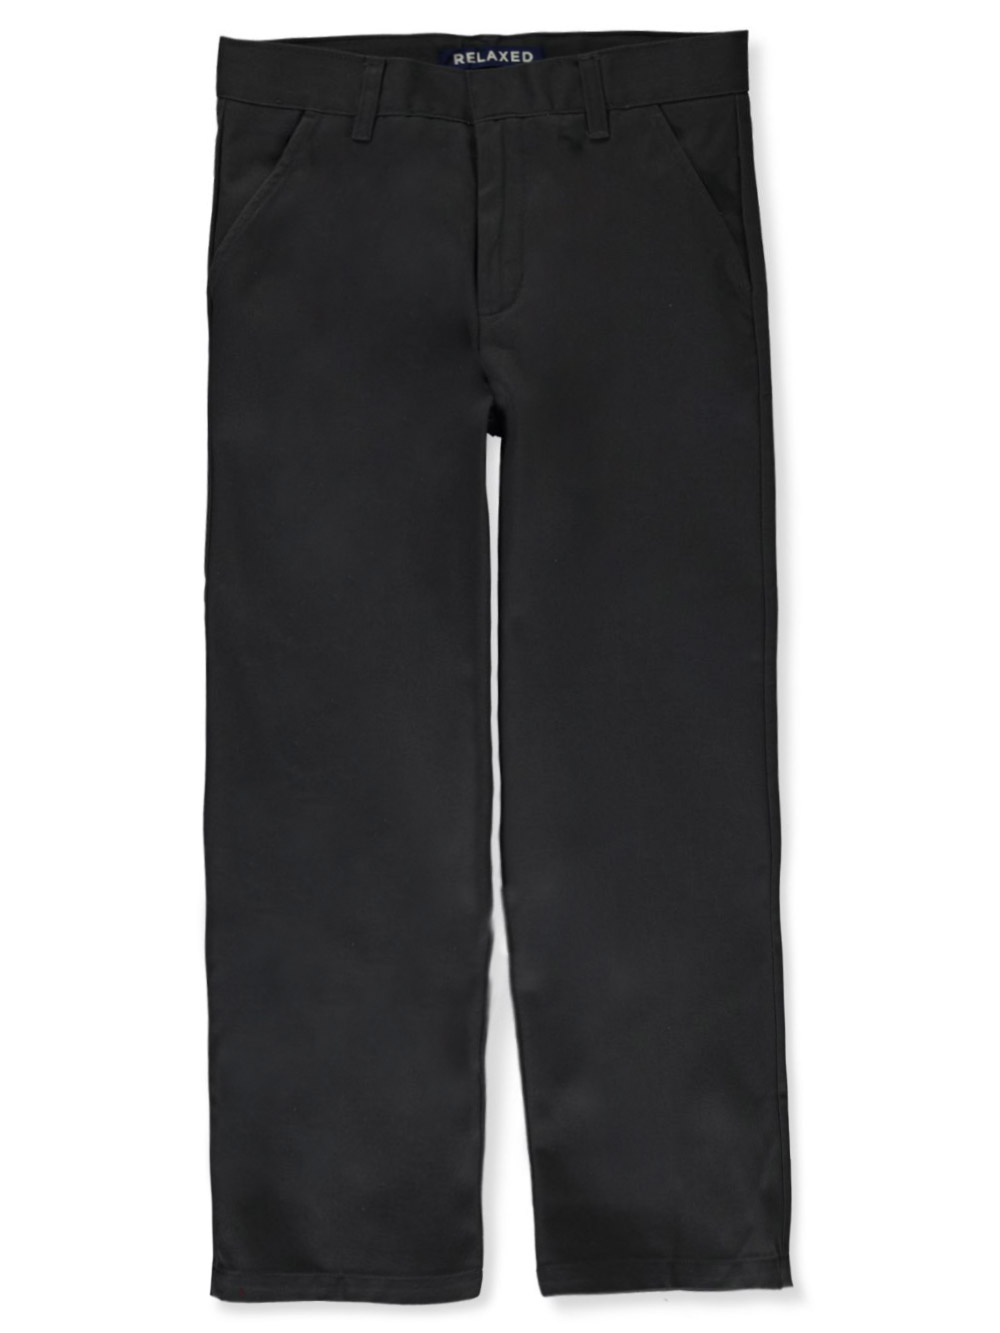 French Toast Husky Boys' Flat Front Relaxed Pants